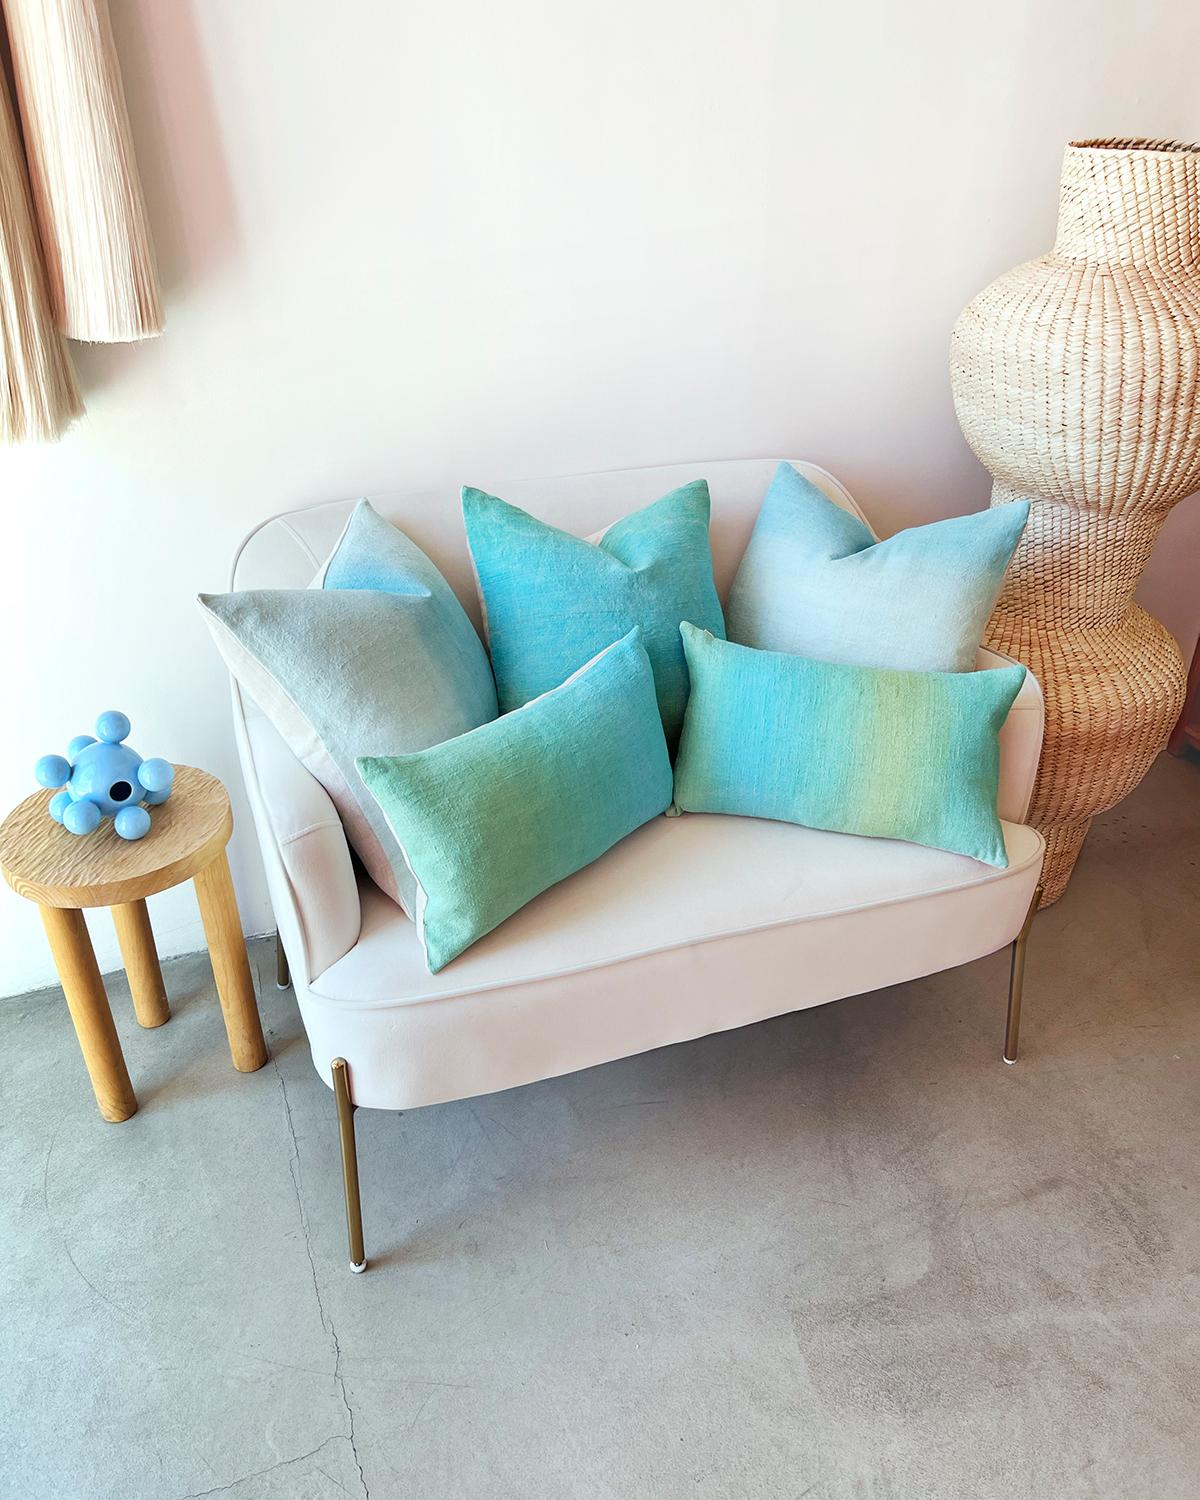 These handmade aqua blue and sky blue ombre cushions are the perfect pop of color to brighten up your space. Hand made from natural materials like vintage linen, they are sure to make your living room or bedroom feel more modern while adding a